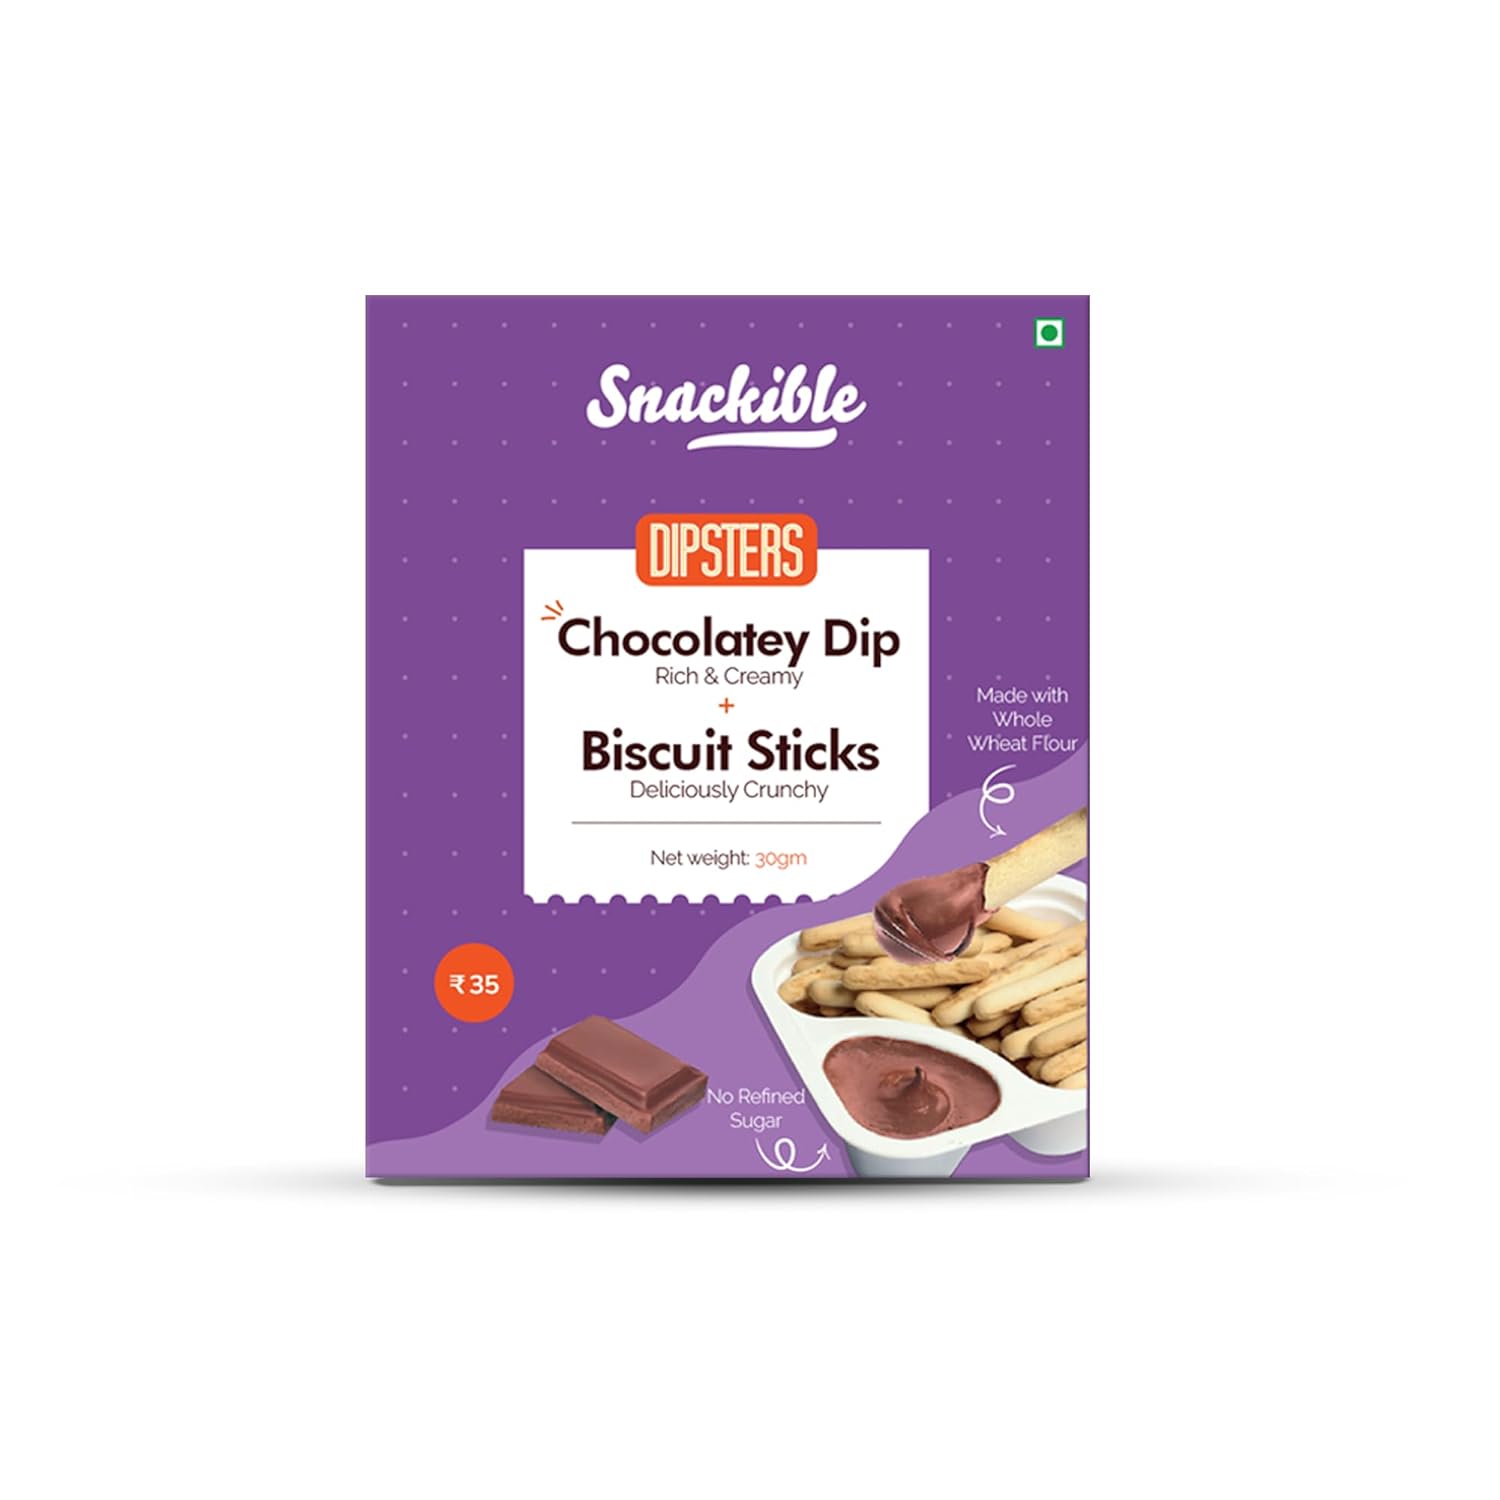 Snackible Dipsters Chocolatey Dip with Biscuit Sticks (Pack of 12) | 30 g each